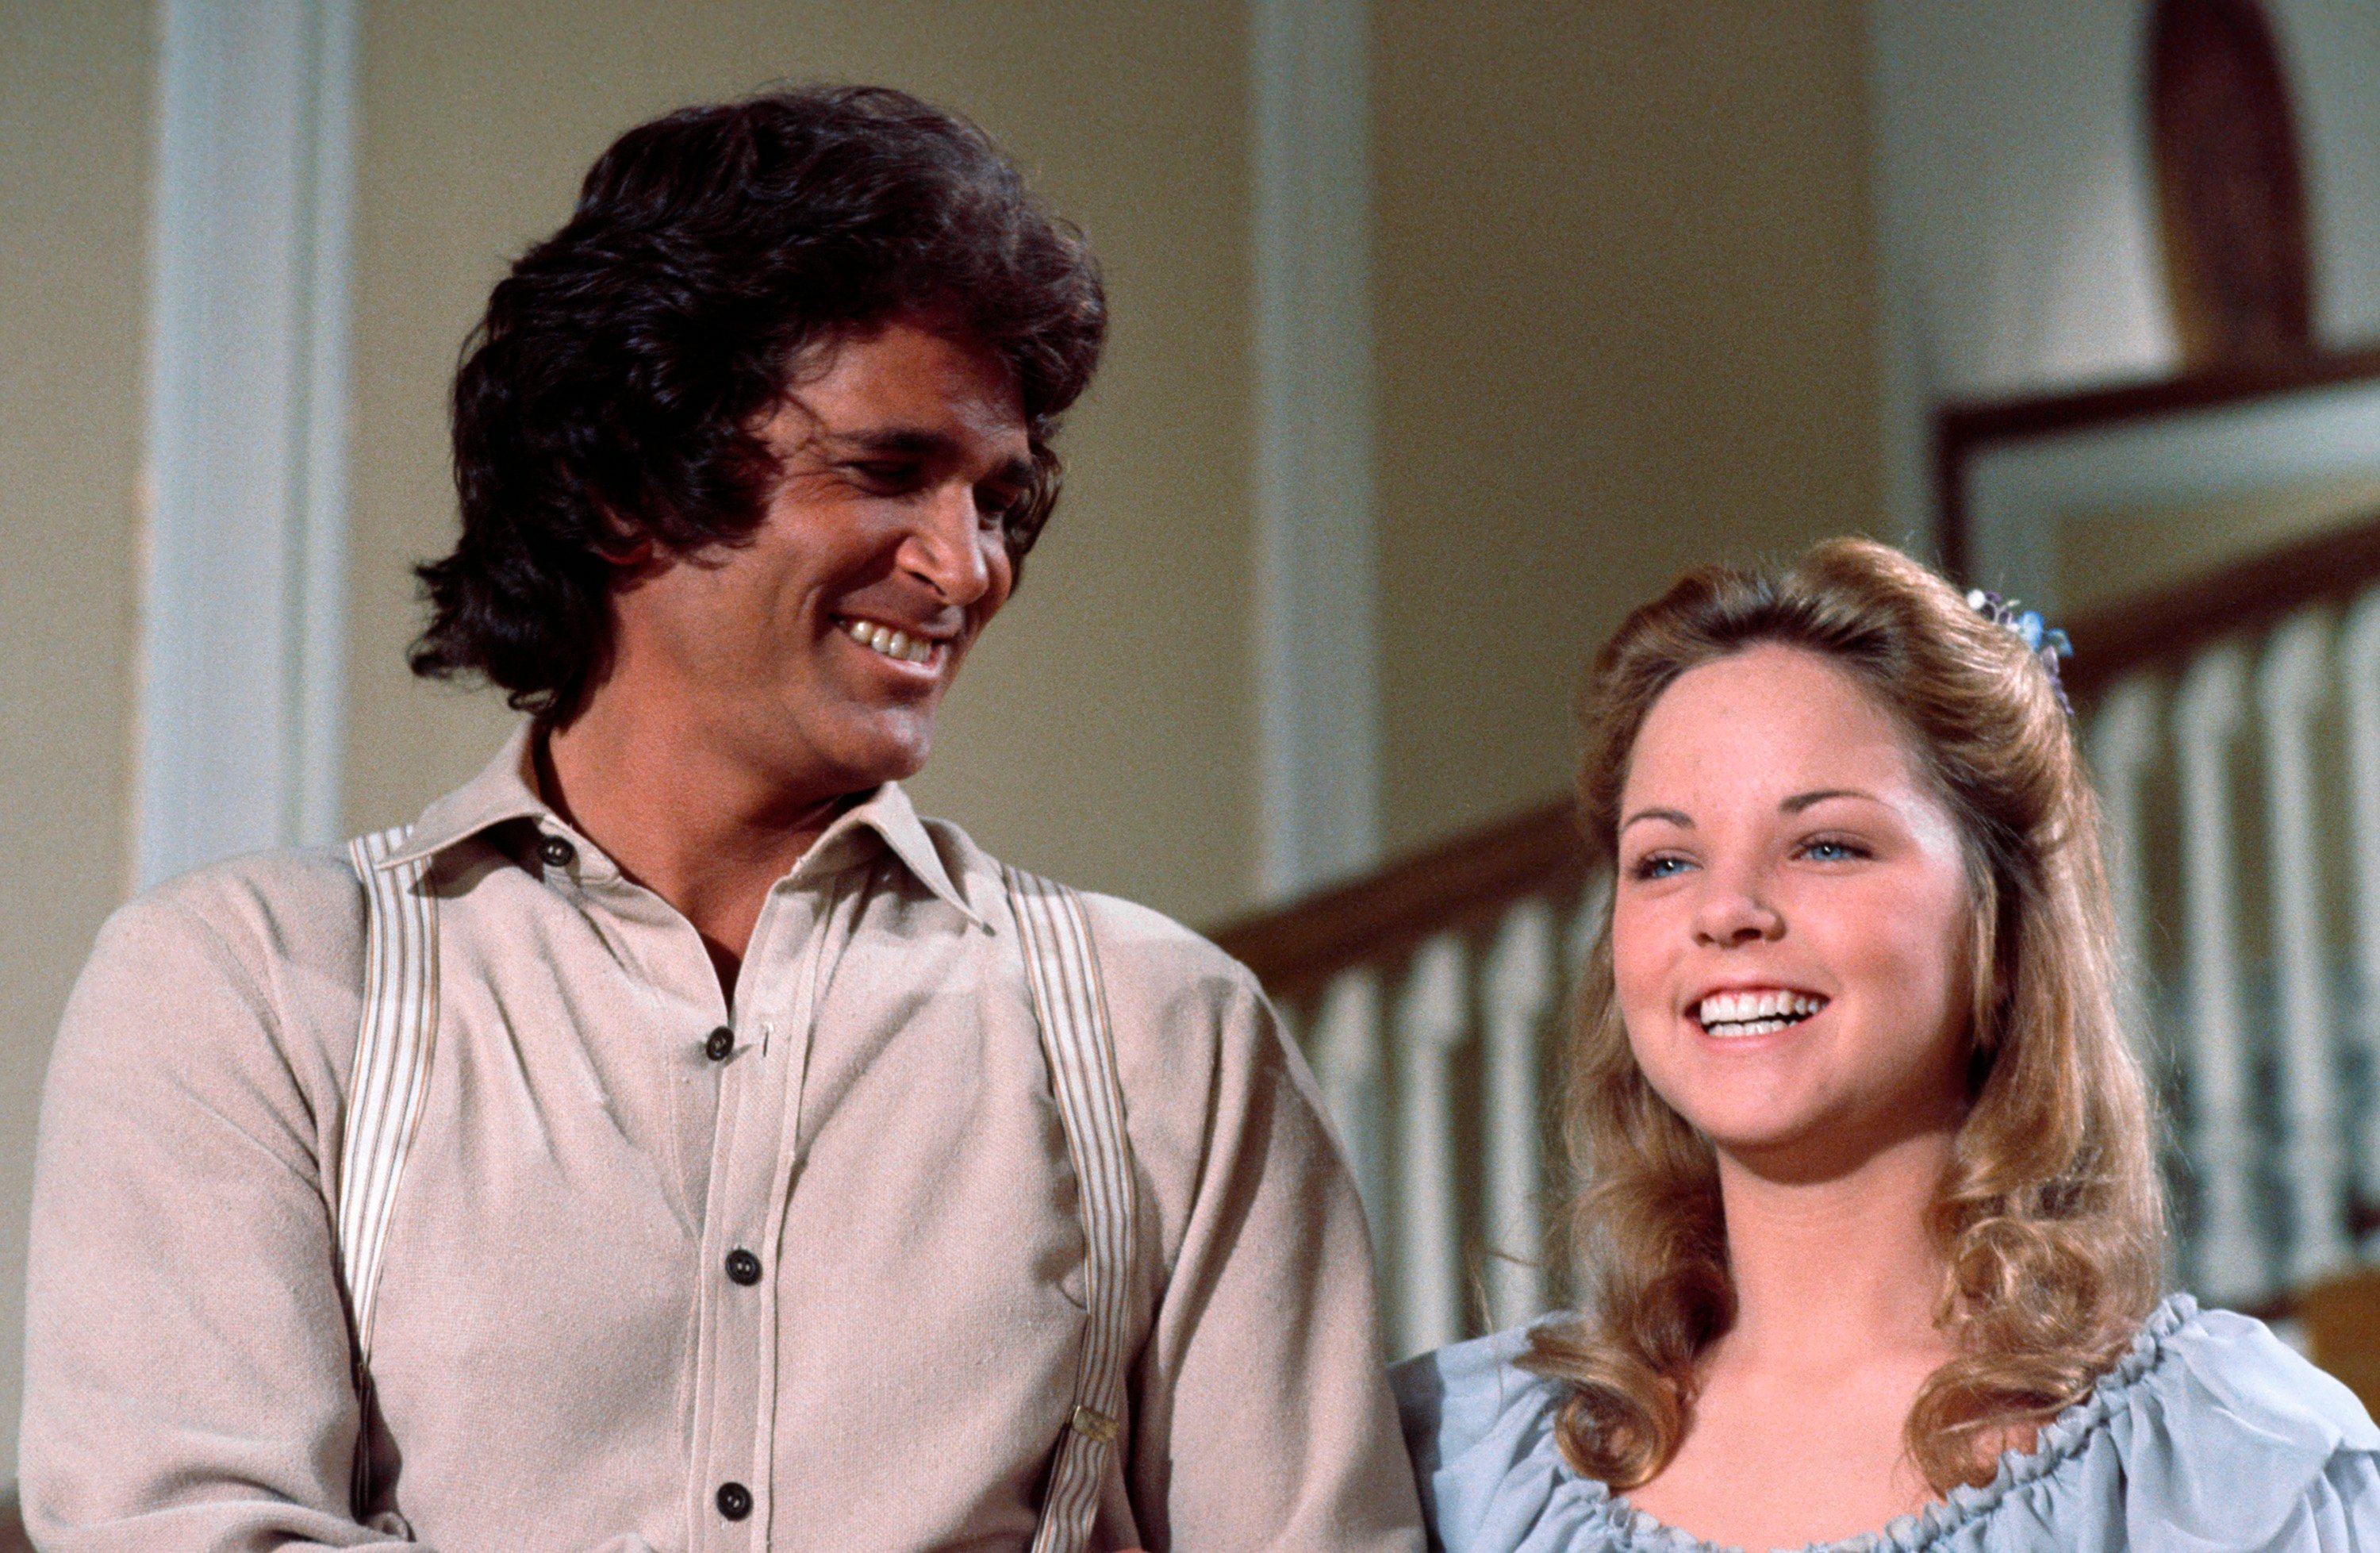 Michael Landon smiles while standing next to Melissa Sue Anderson on the set of Little House on the Prairie.